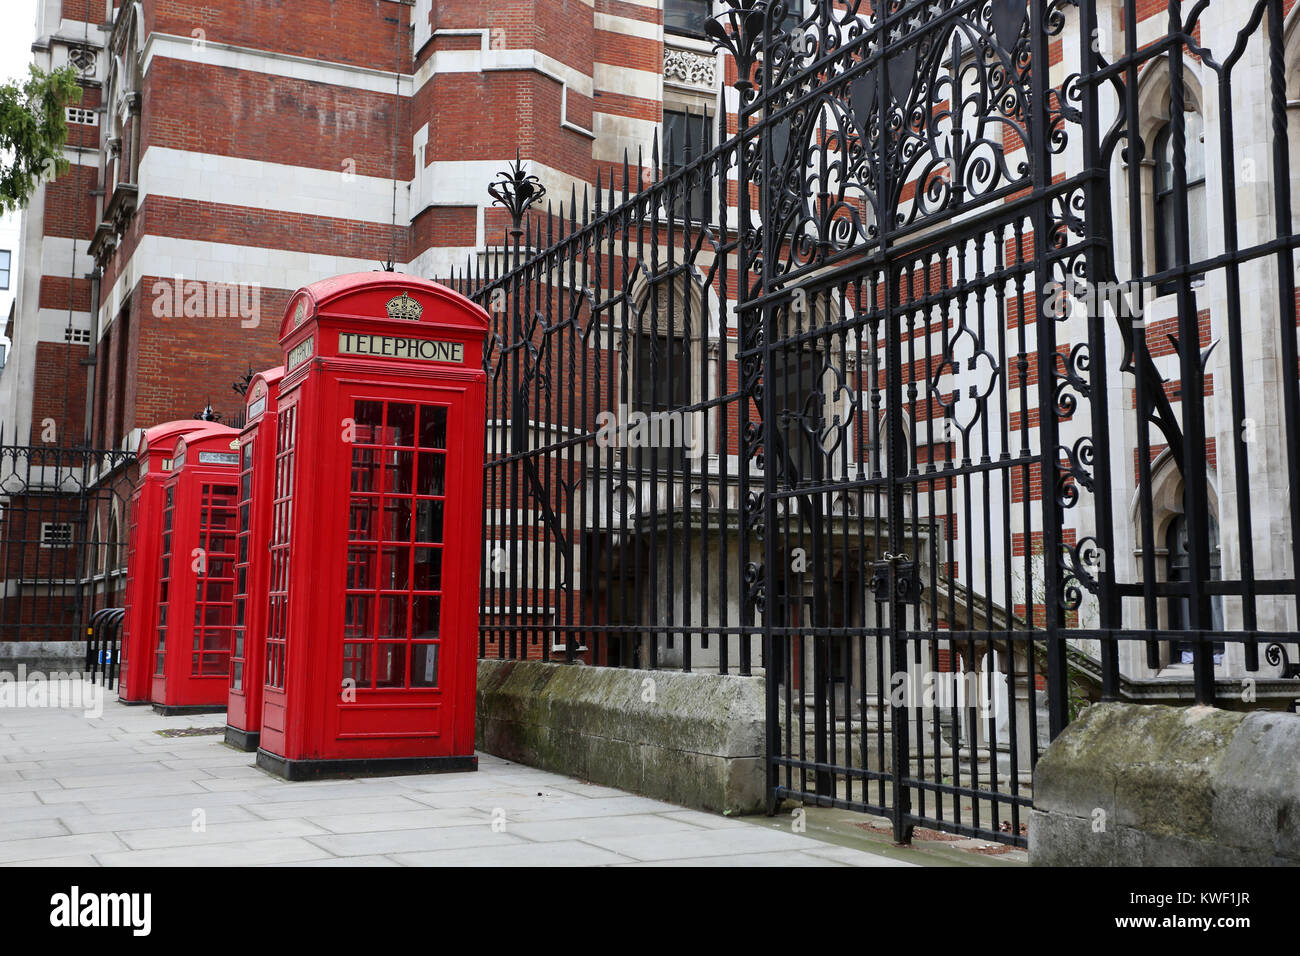 Classic old red telephone boxes pictured on a street in London, UK. Stock Photo